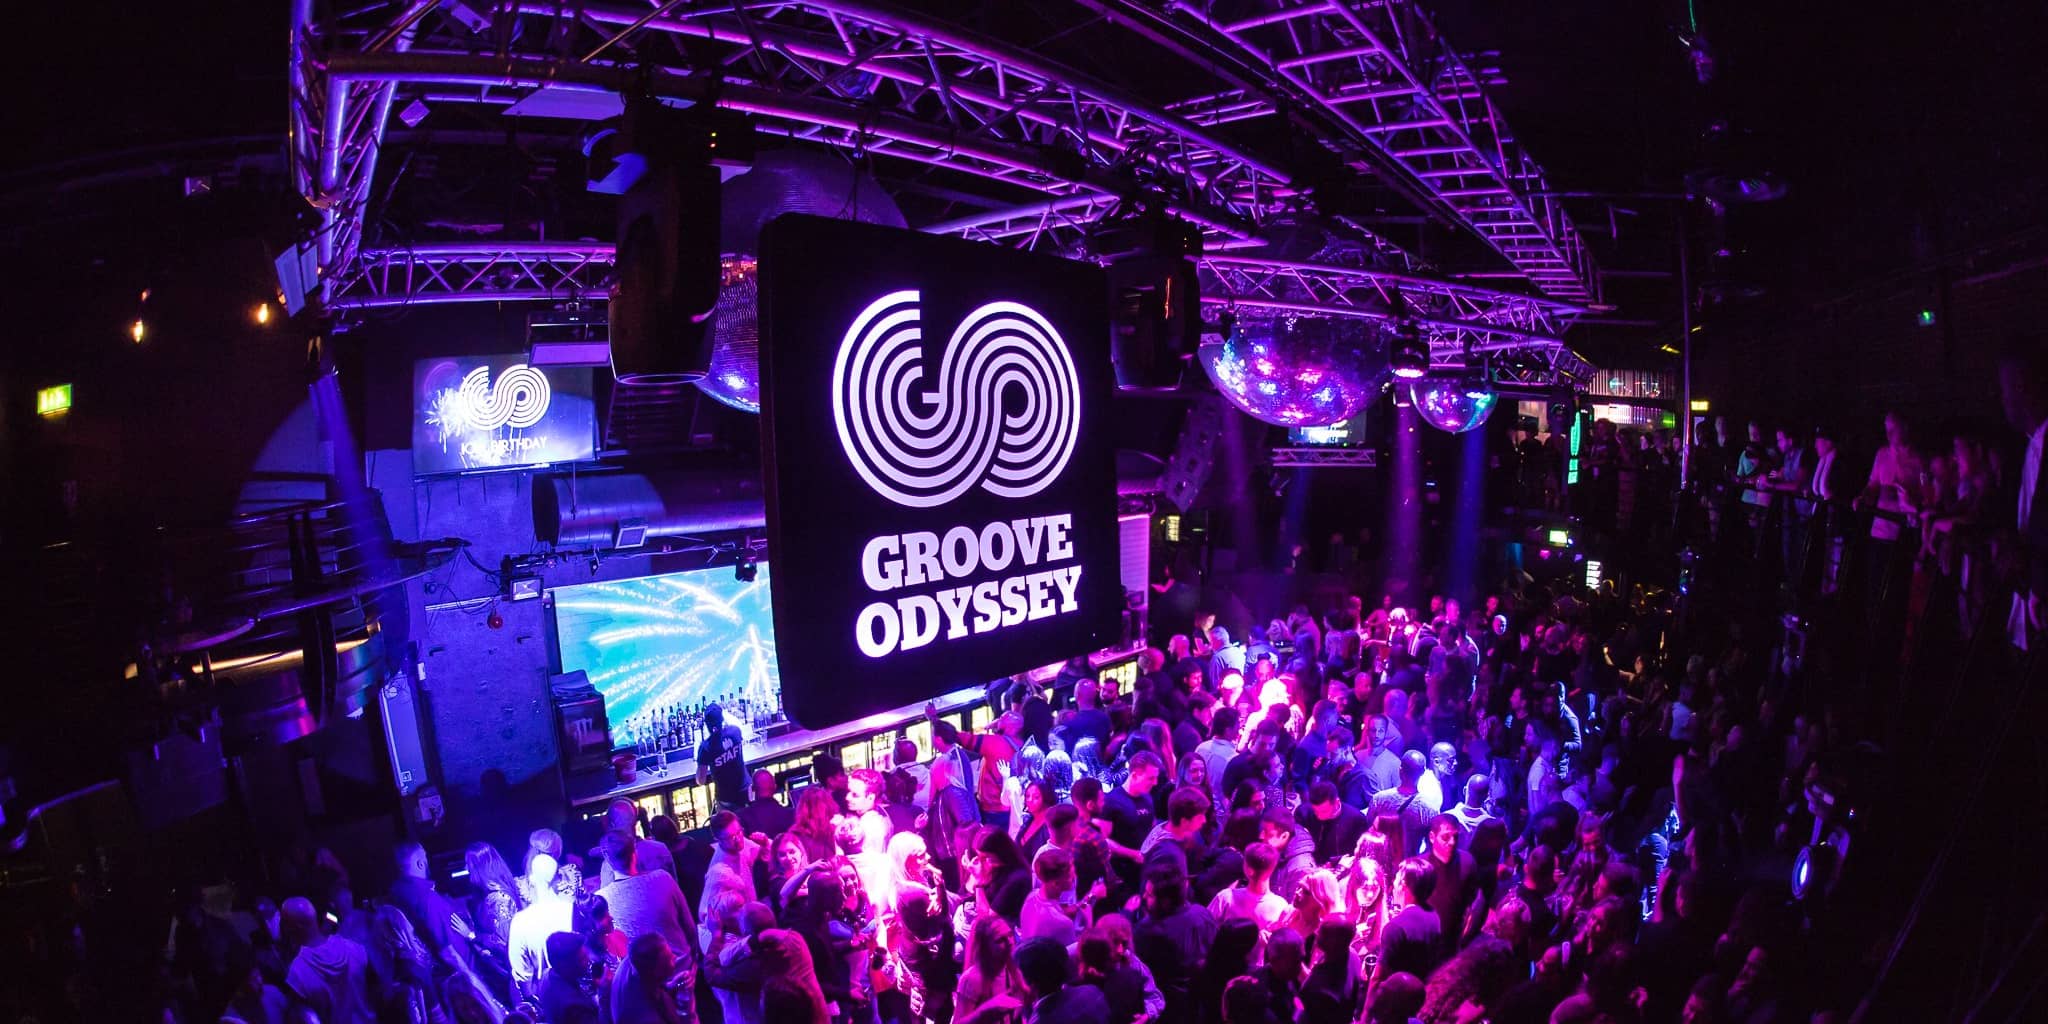 Groove Odyssey performing live in The Box at London's Ministry of Sound